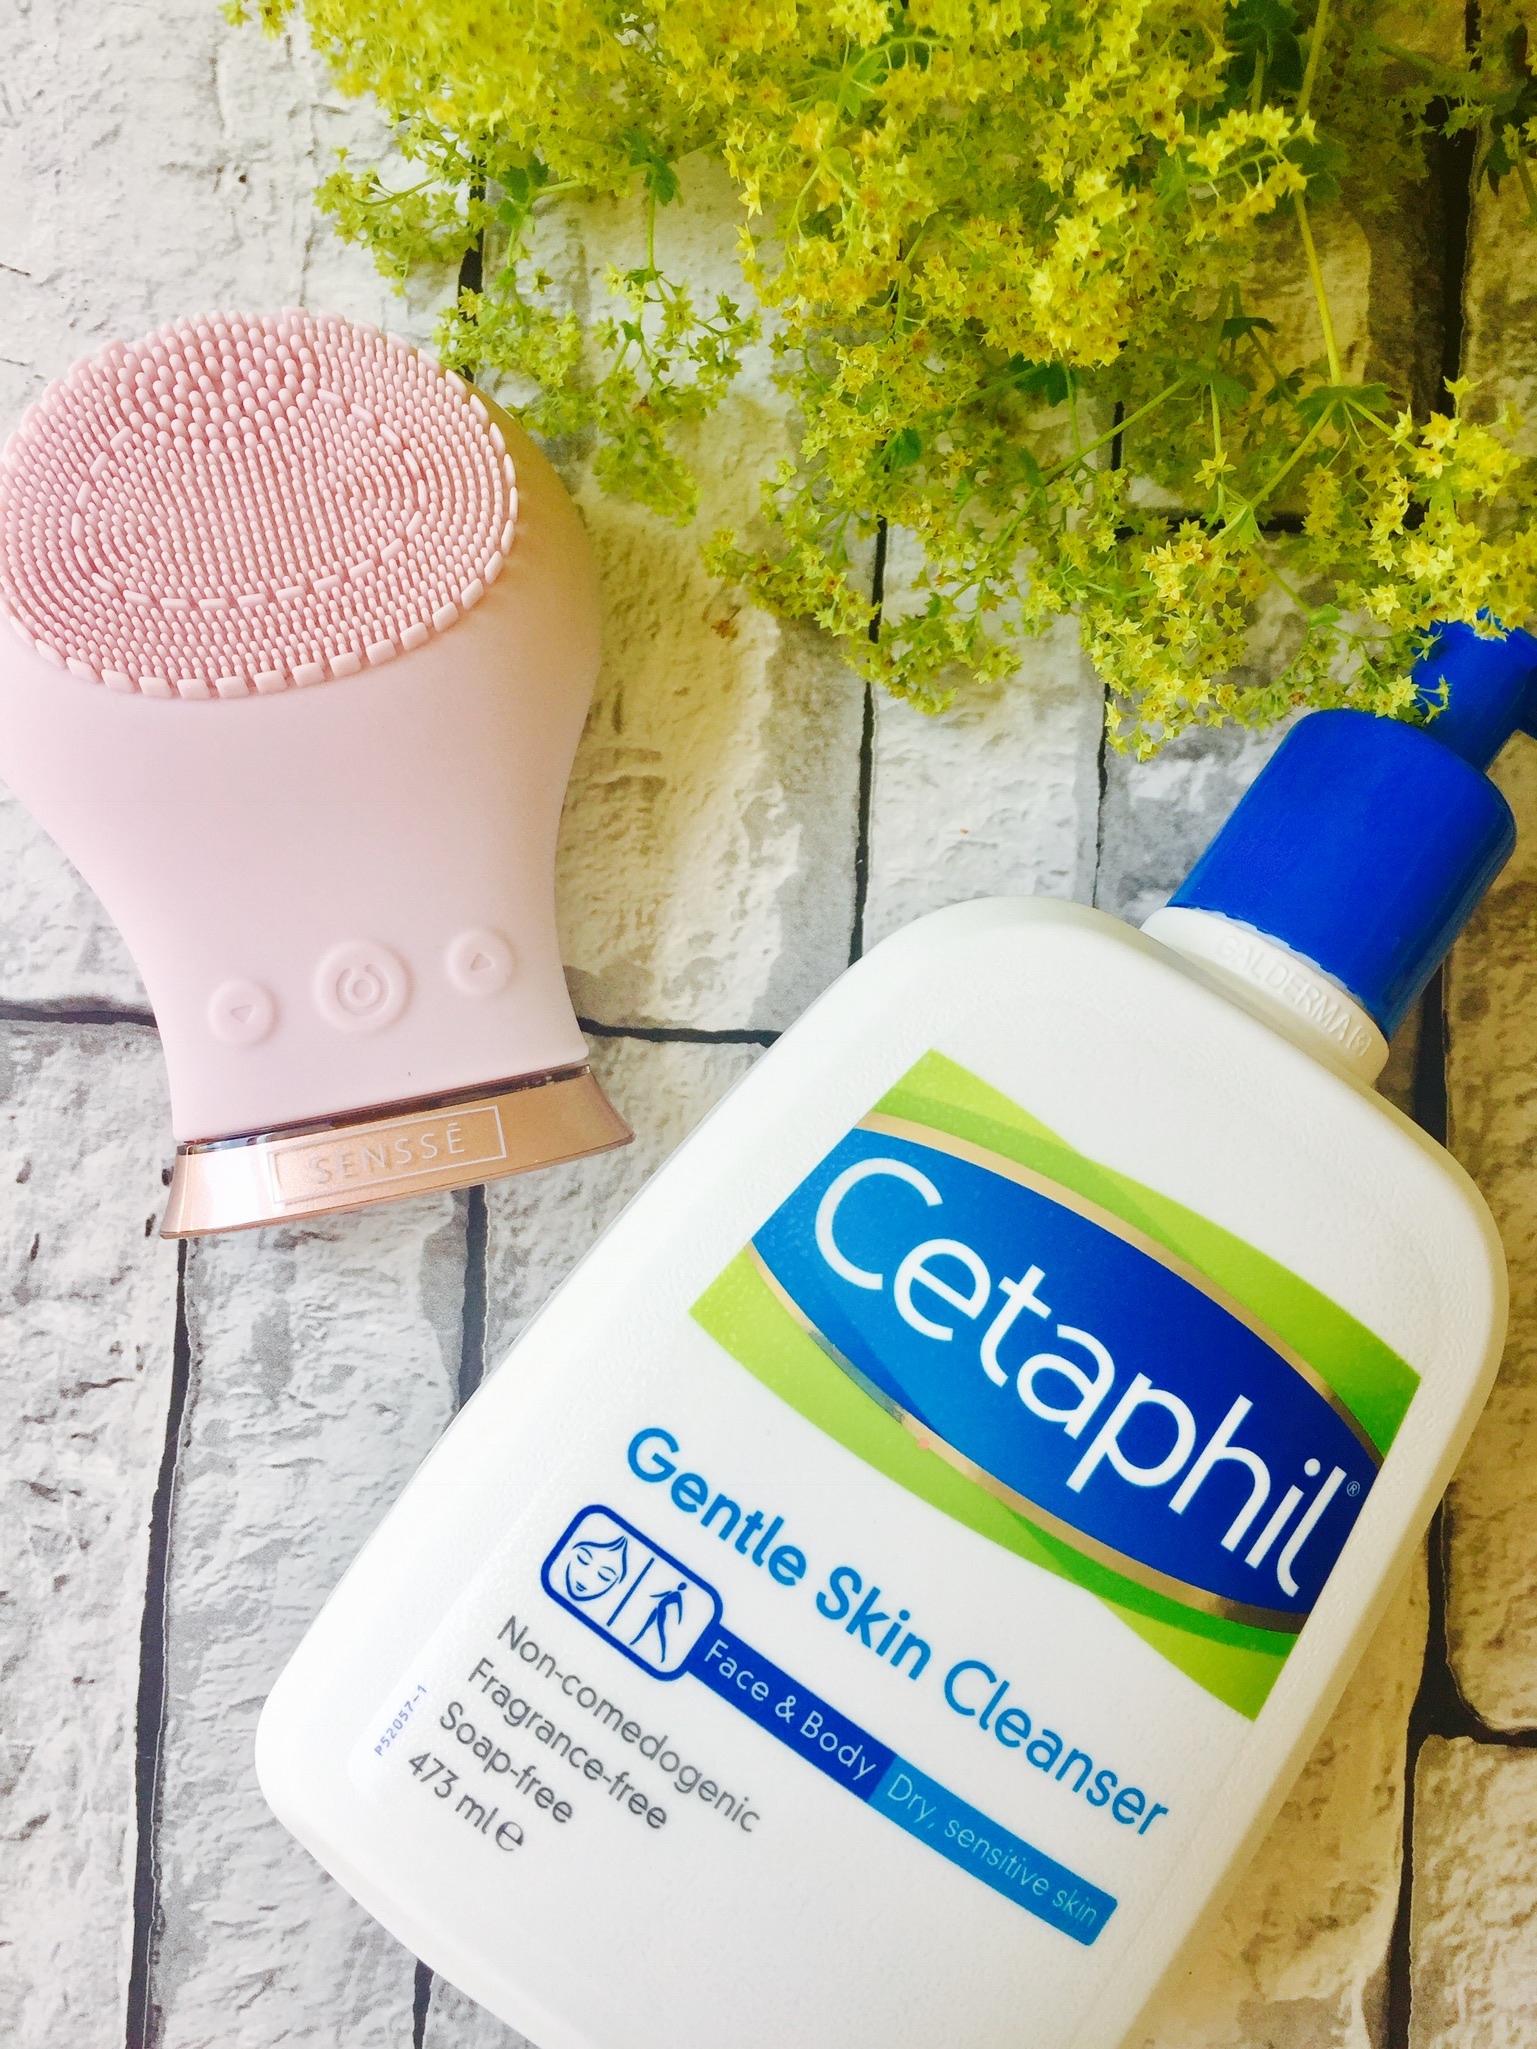 Sensse silicone cleansing device Cetaphil Gentle Skin Cleanser